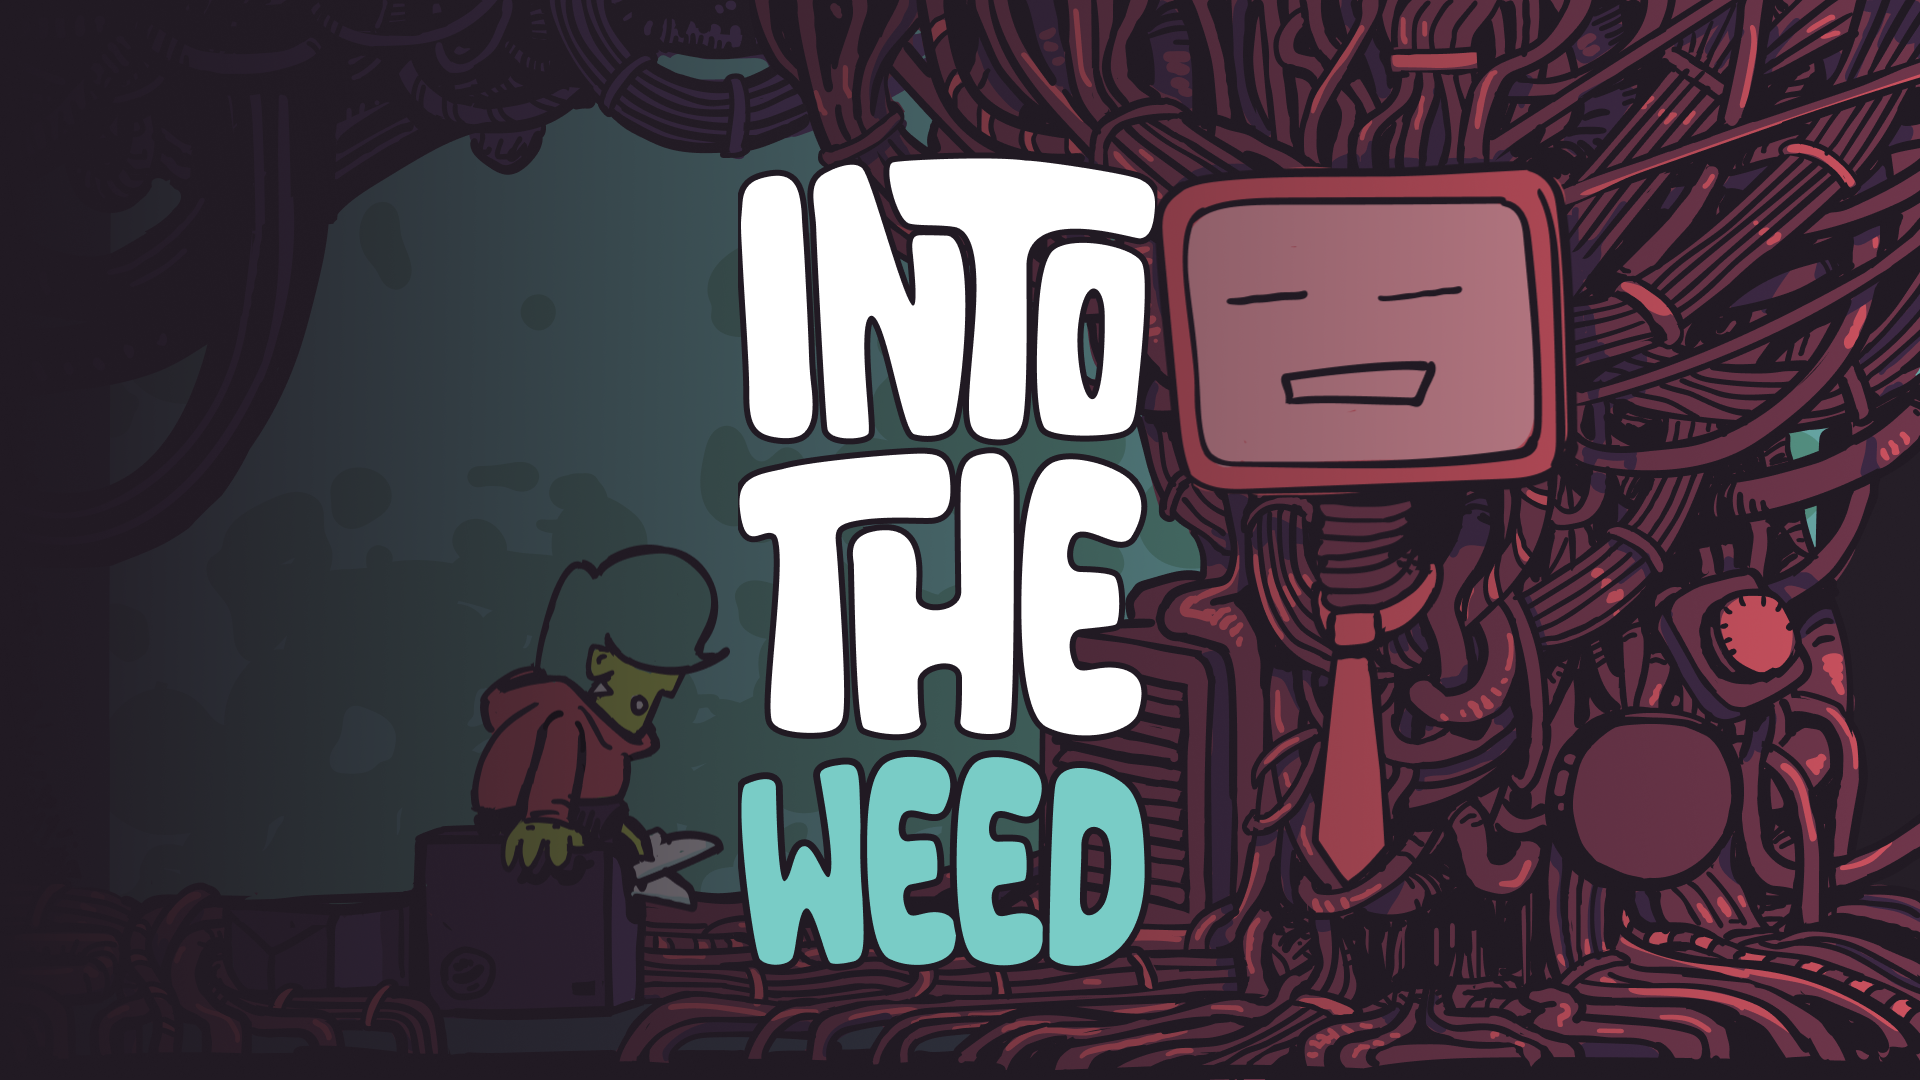 Into the Weed